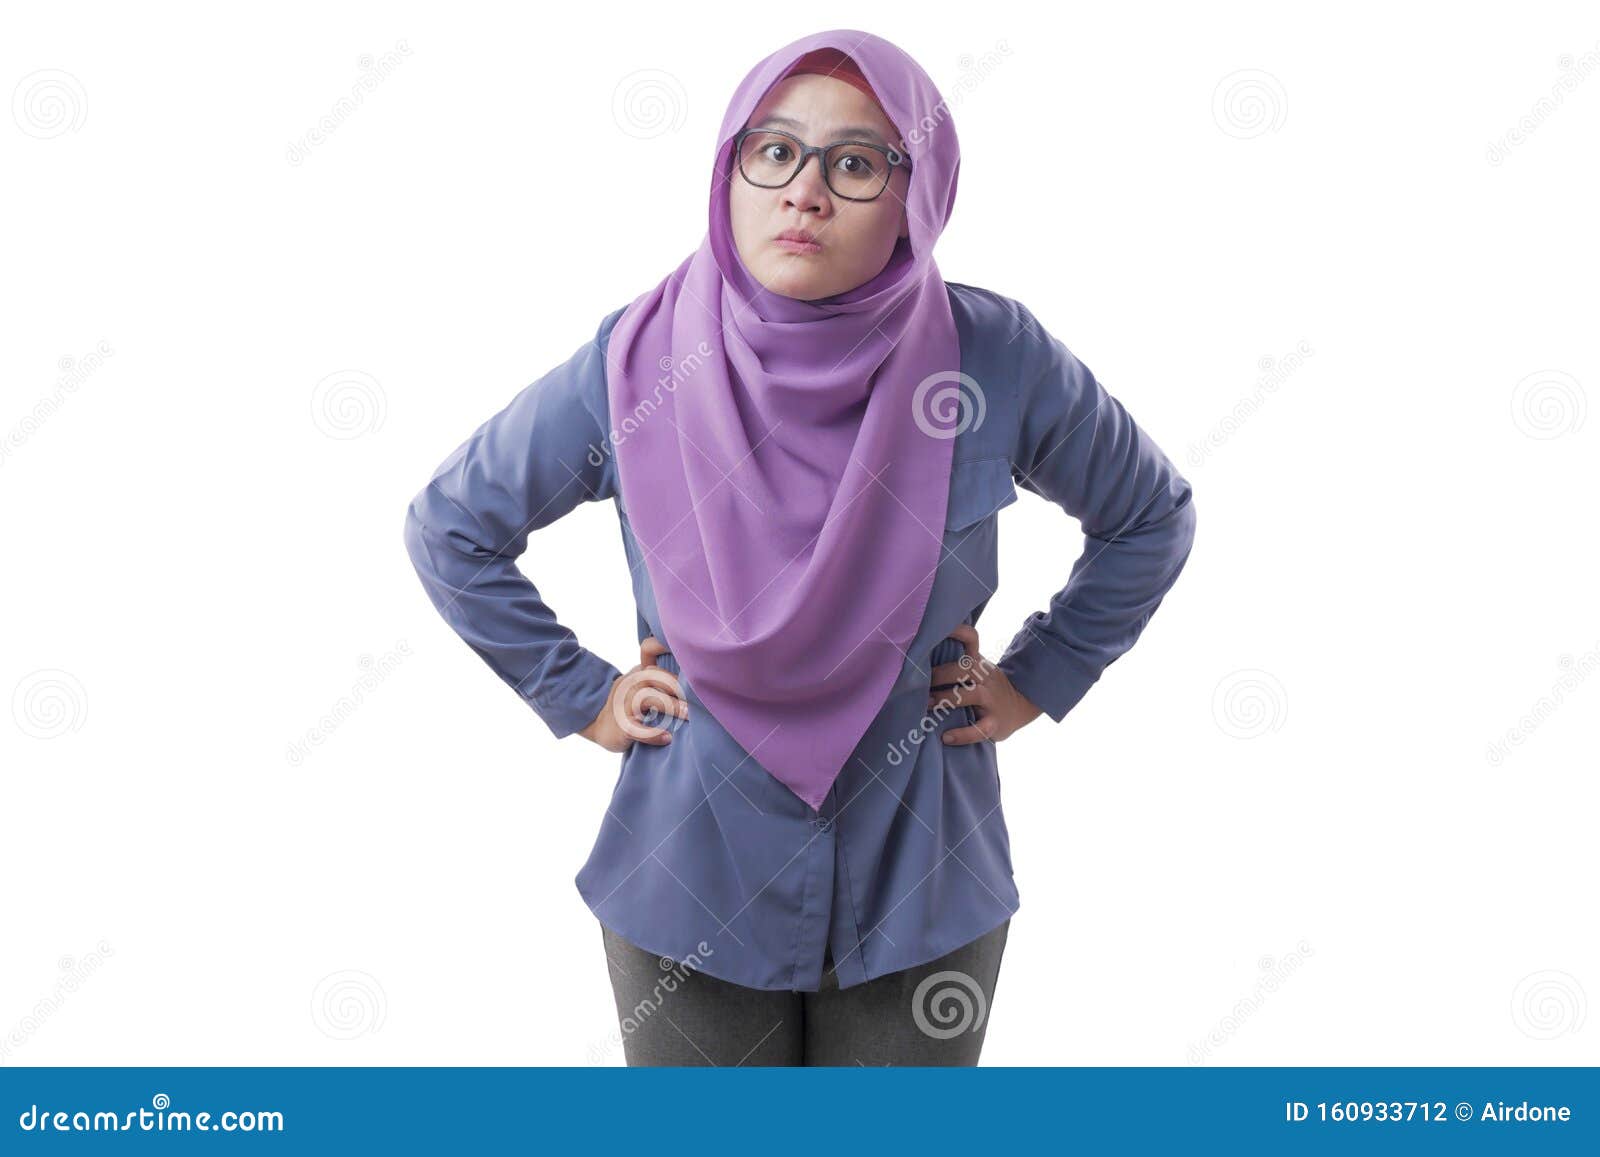 muslim woman pointing at camera with angry expression, giving warn